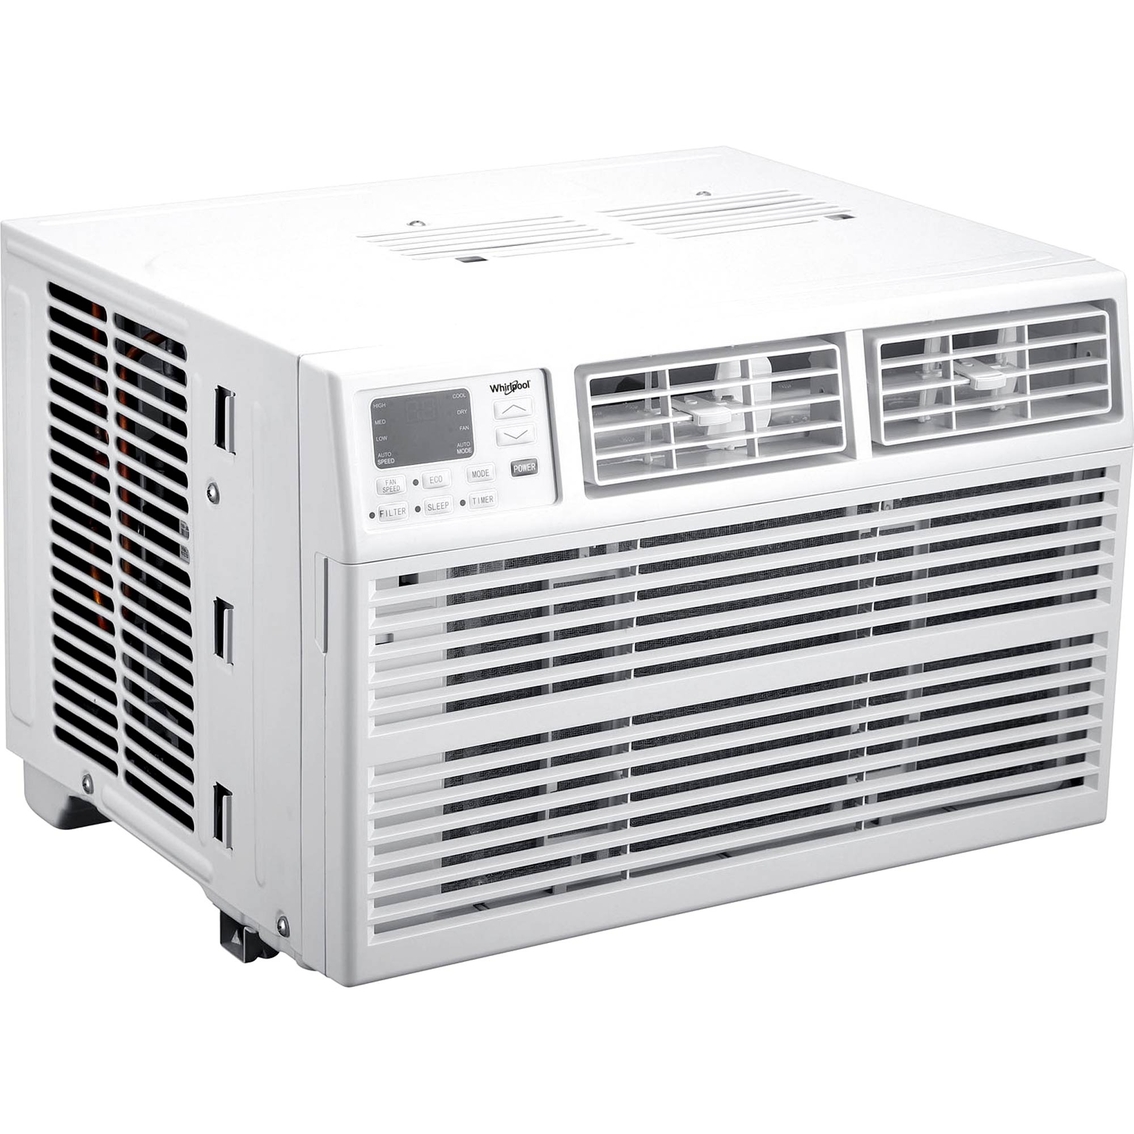 Whirlpool Energy Star 6,000 BTU Window Mounted Air Conditioner with Remote Control - Image 2 of 5